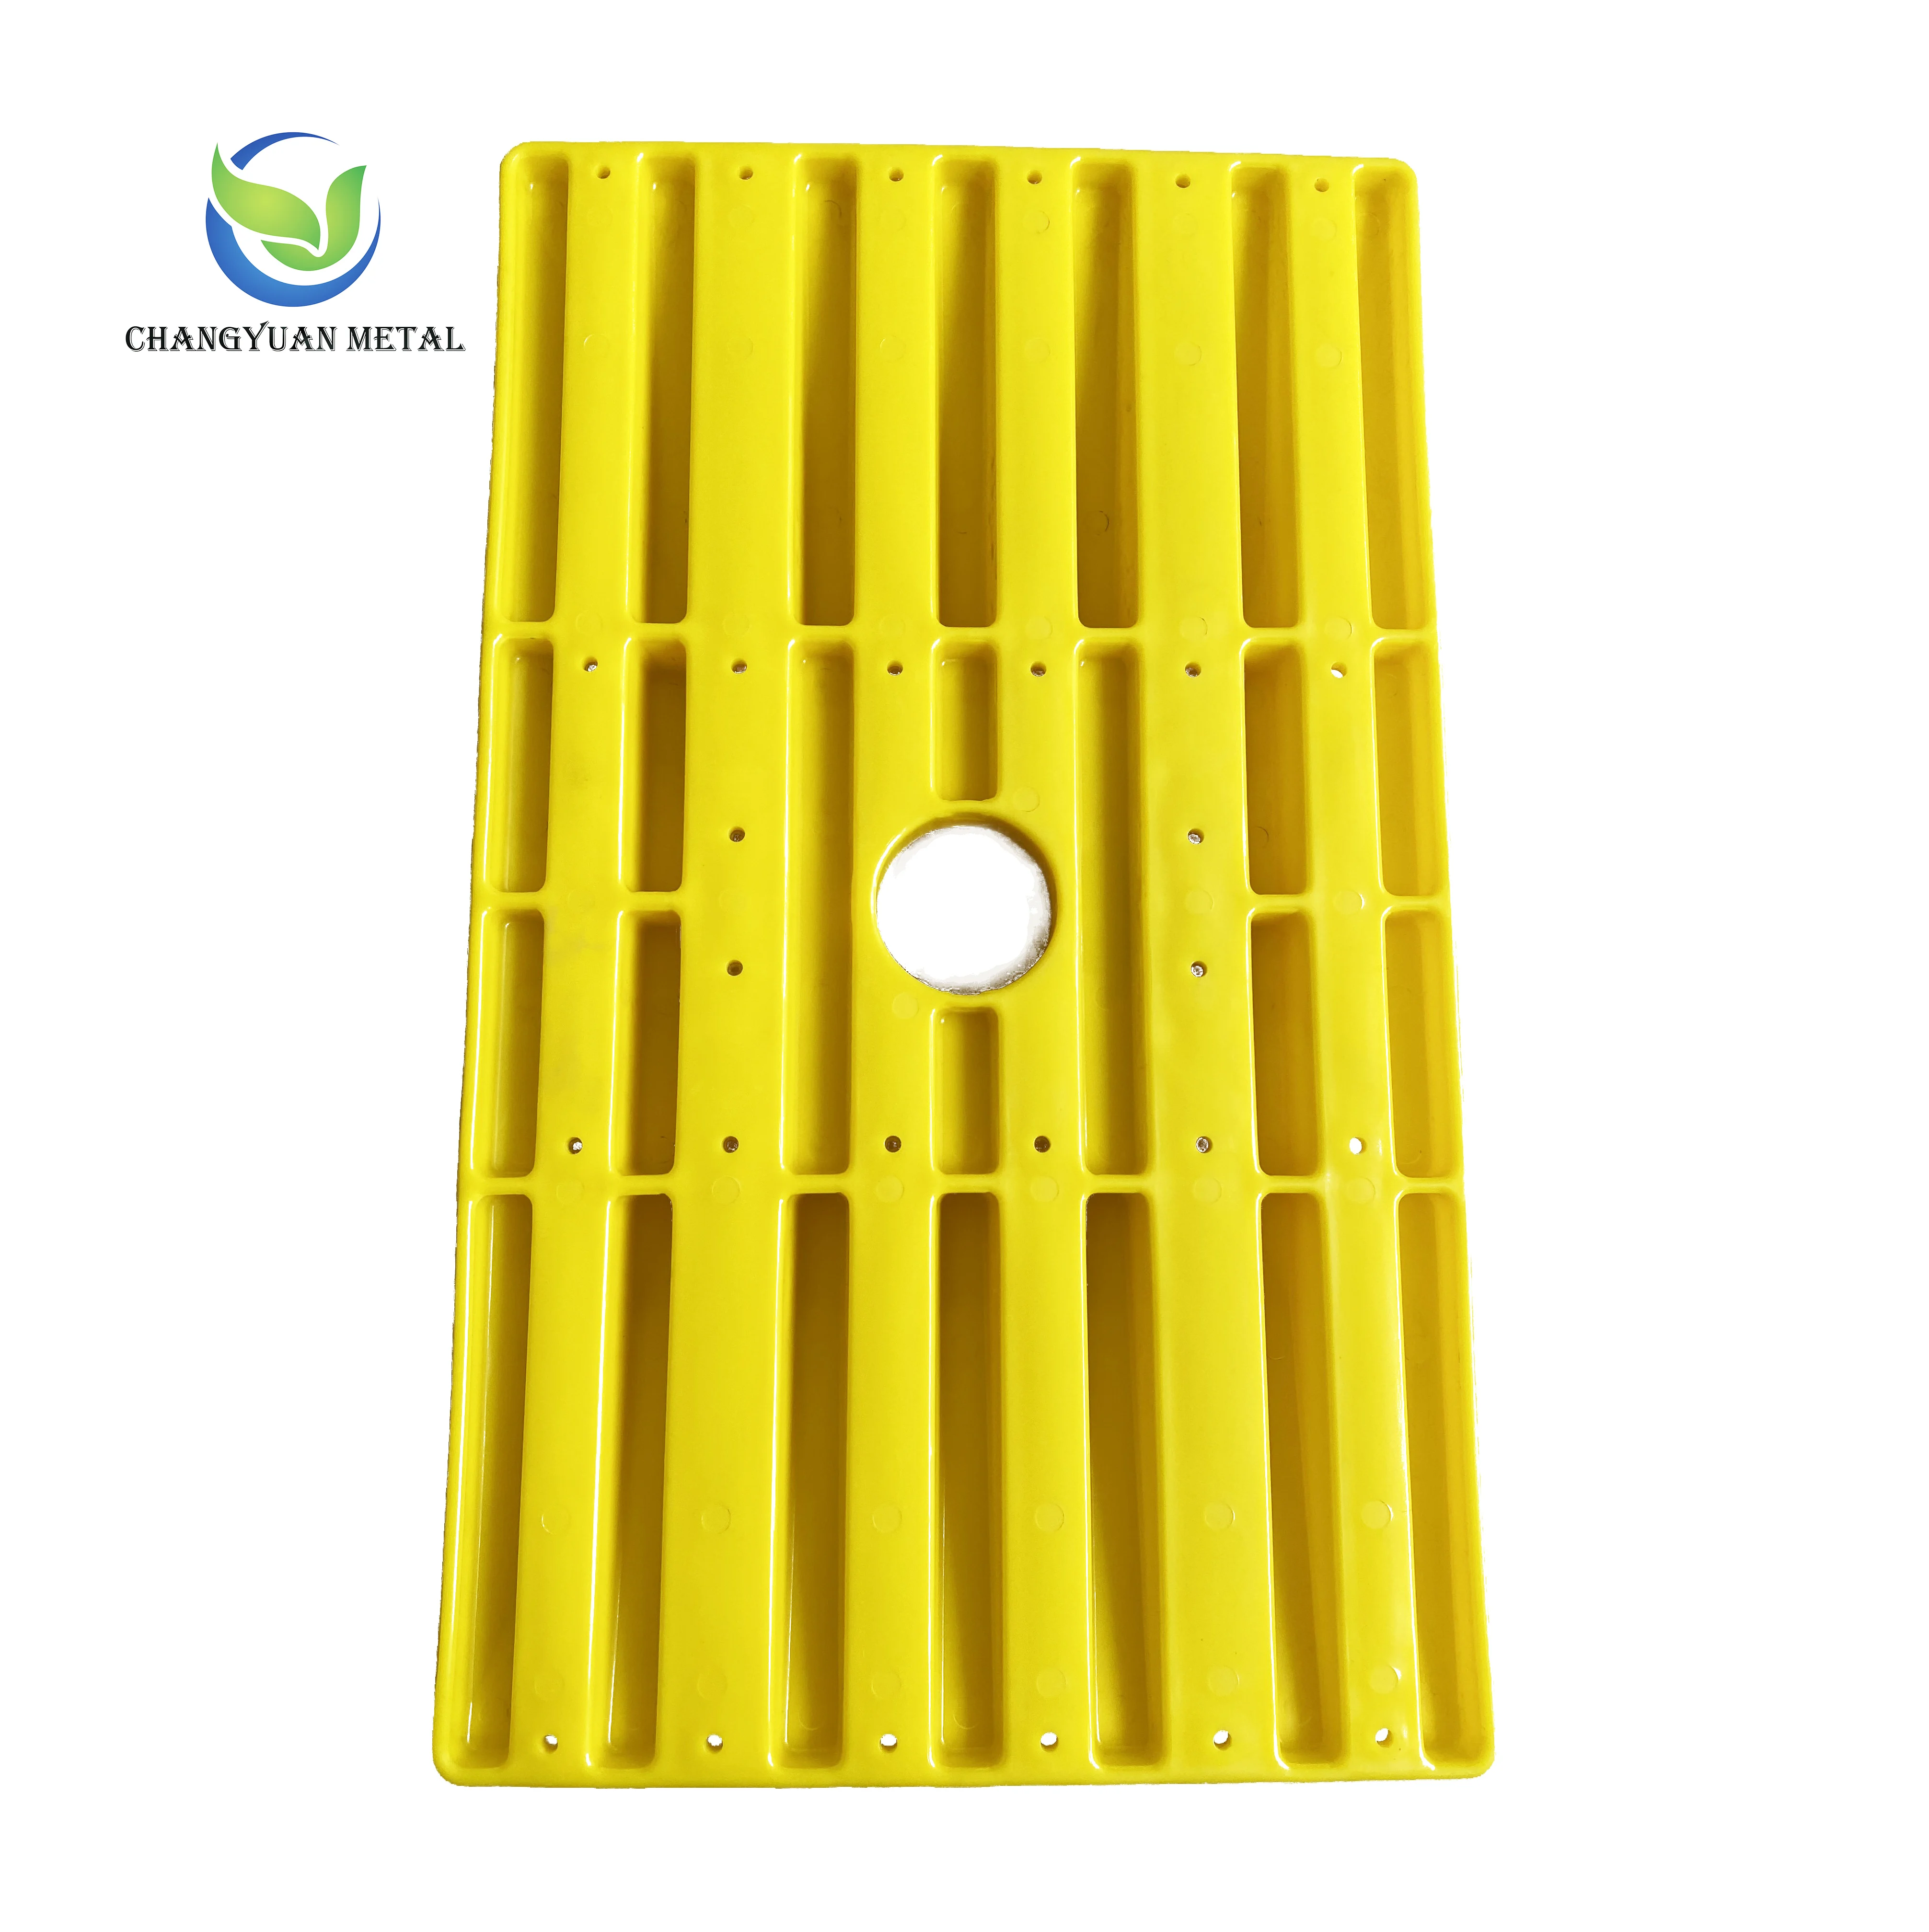 Colorful Scaffold Plastic Base Plate For Safety Work